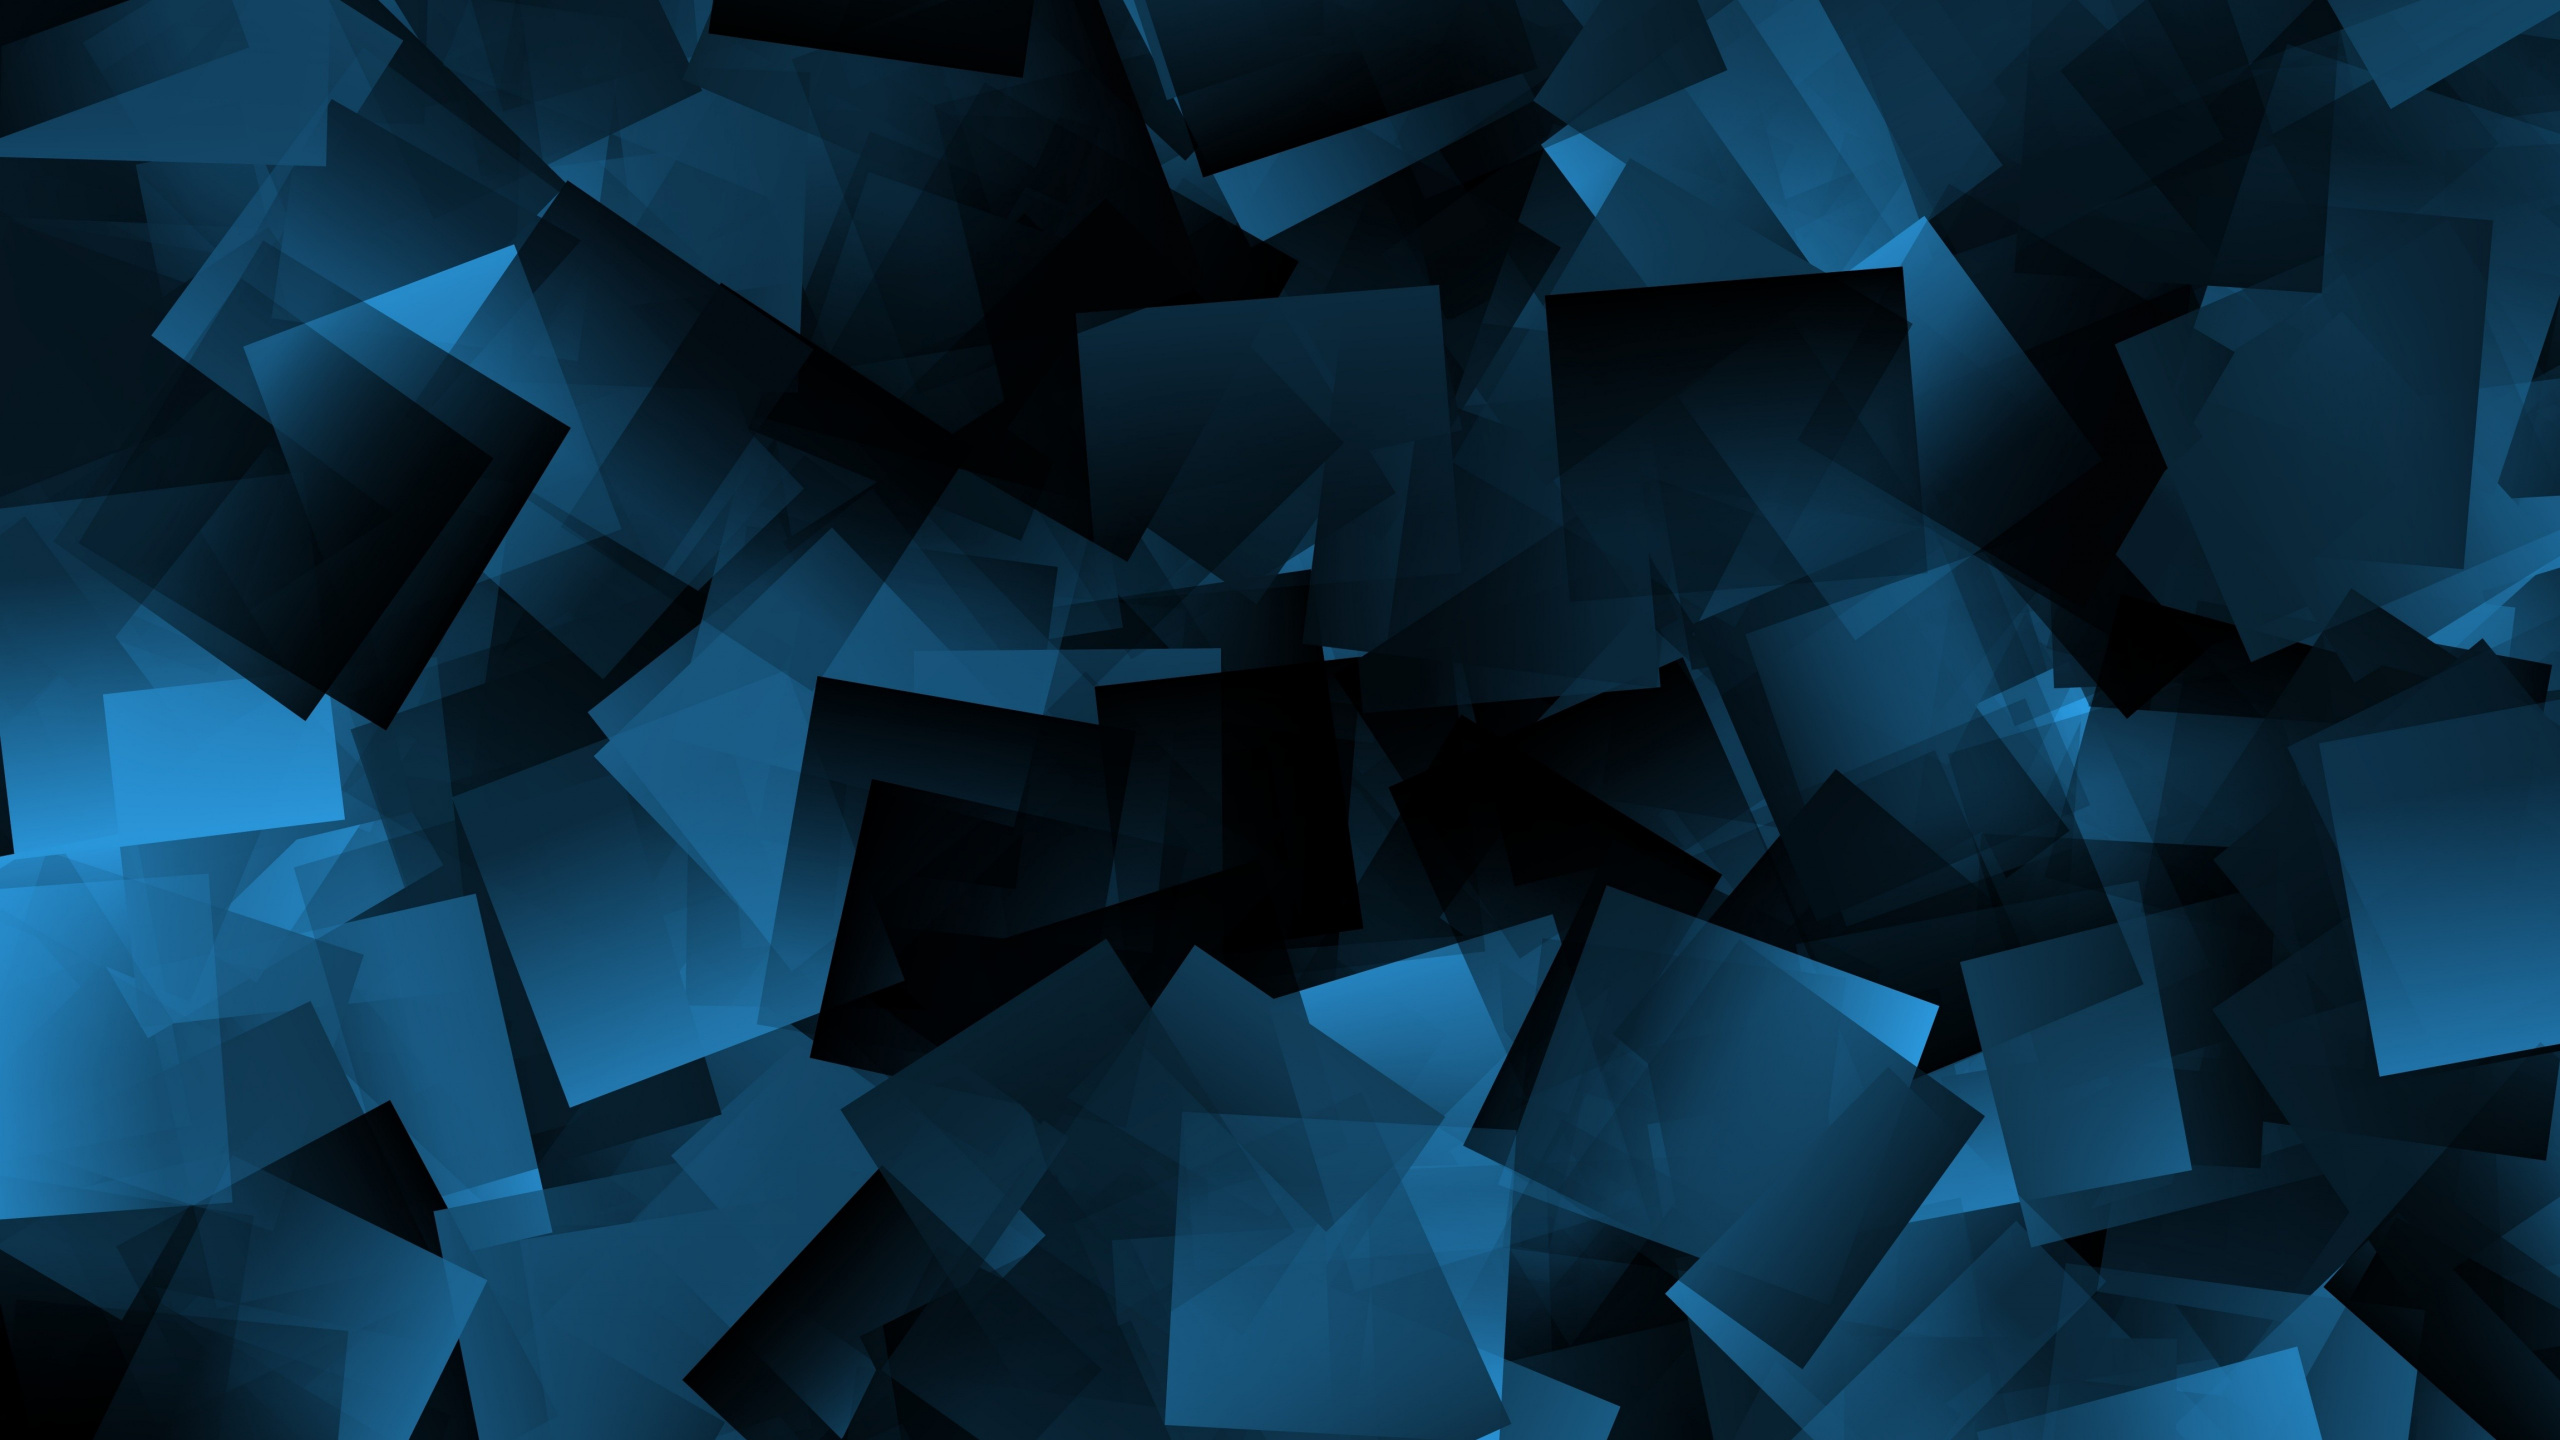 Blue and White Abstract Painting. Wallpaper in 2560x1440 Resolution